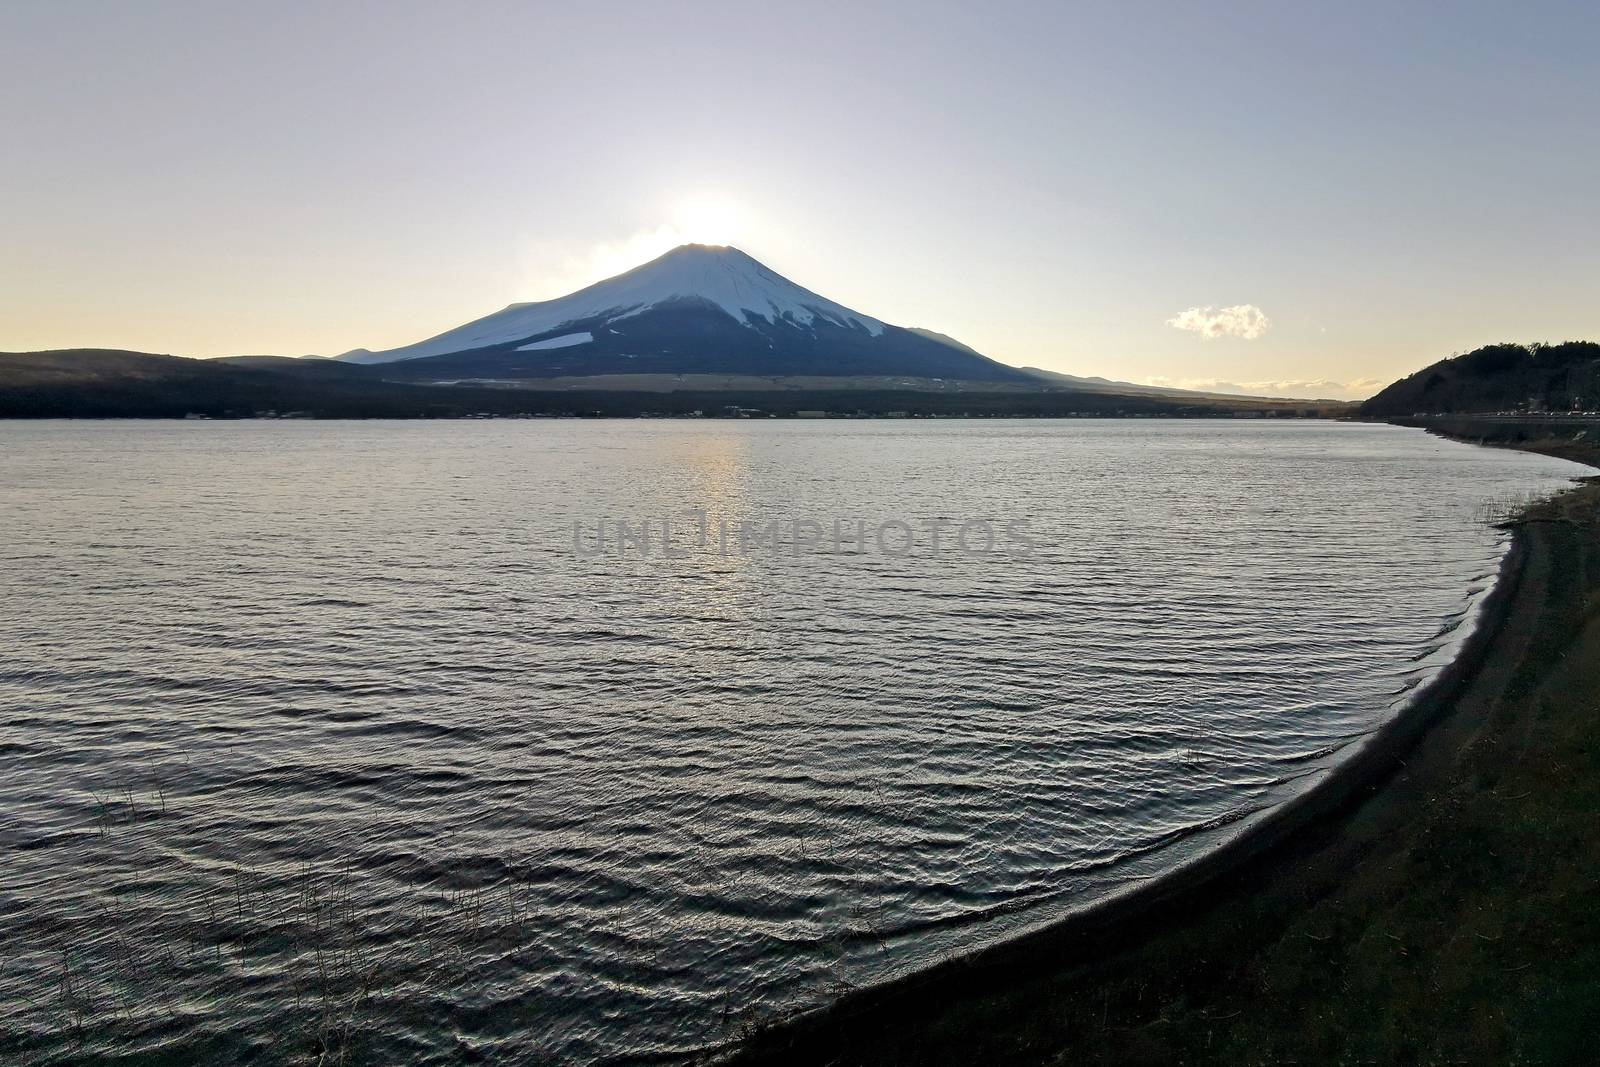 The lake, sky and Fuji mountain with snow in Japan countryside